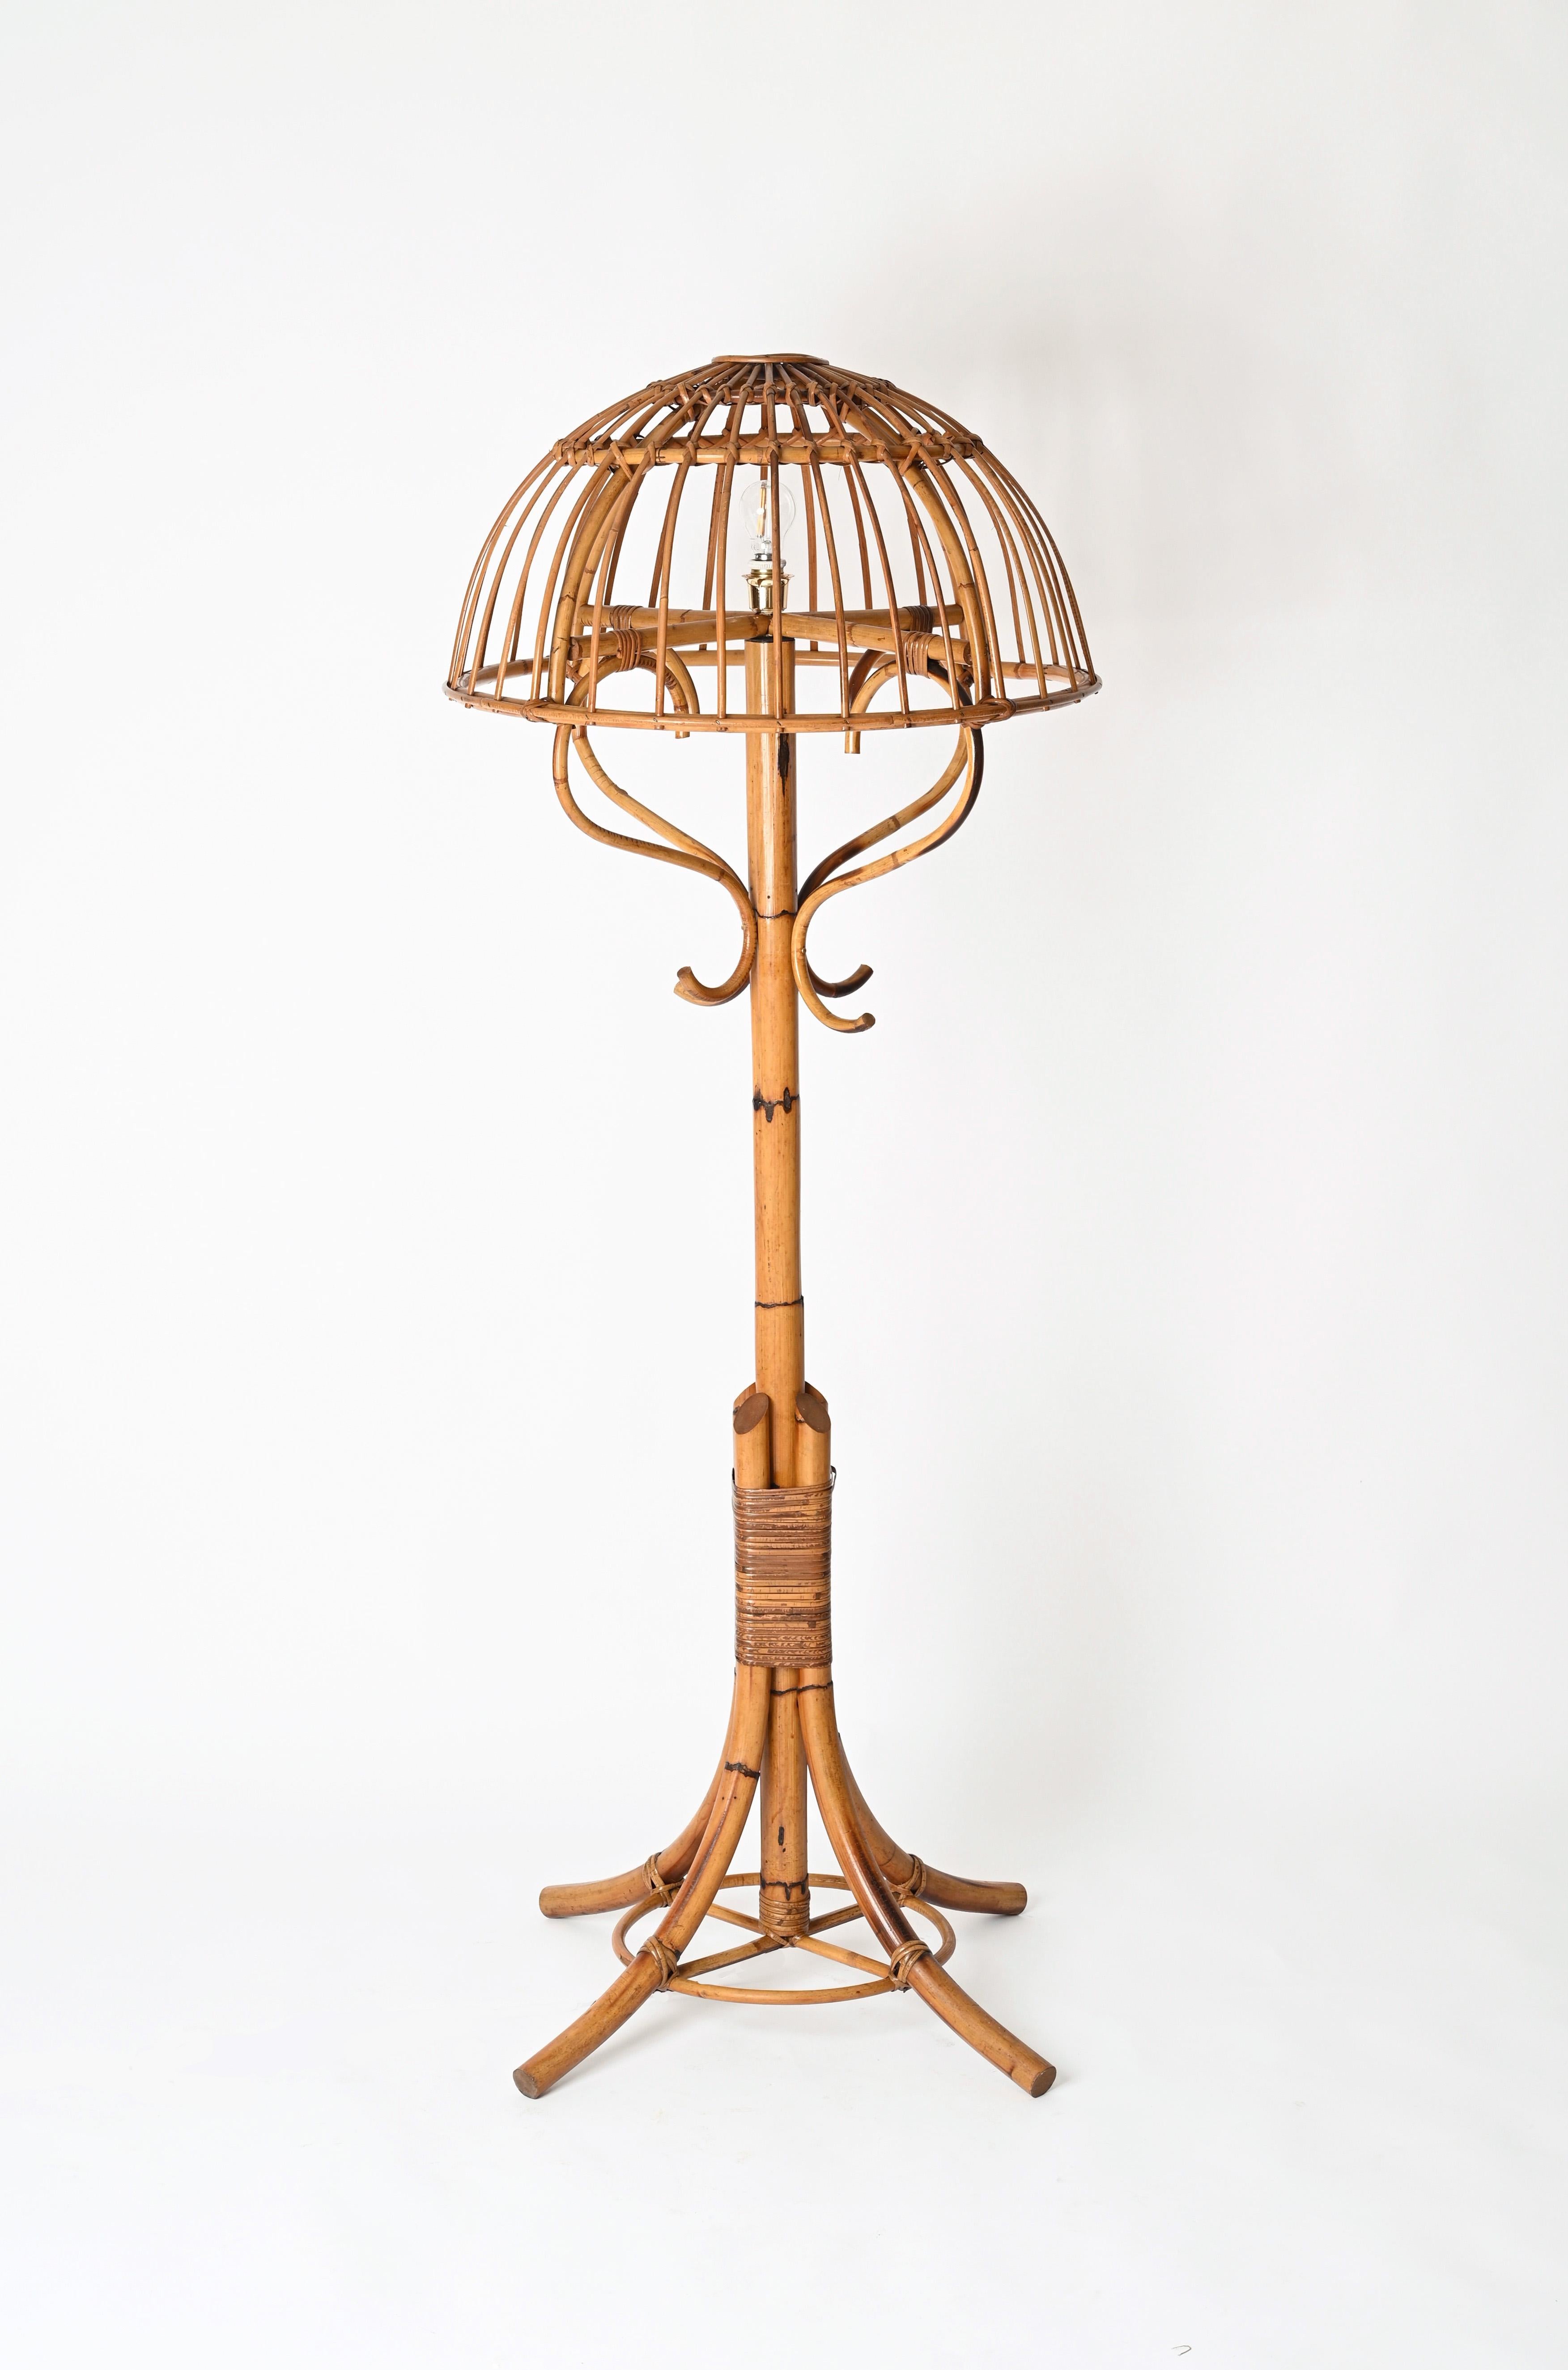 Hand-Crafted French Riviera Floor Lamp in Rattan, Wicker, Bamboo, Sognot Style, Italy 1960s For Sale